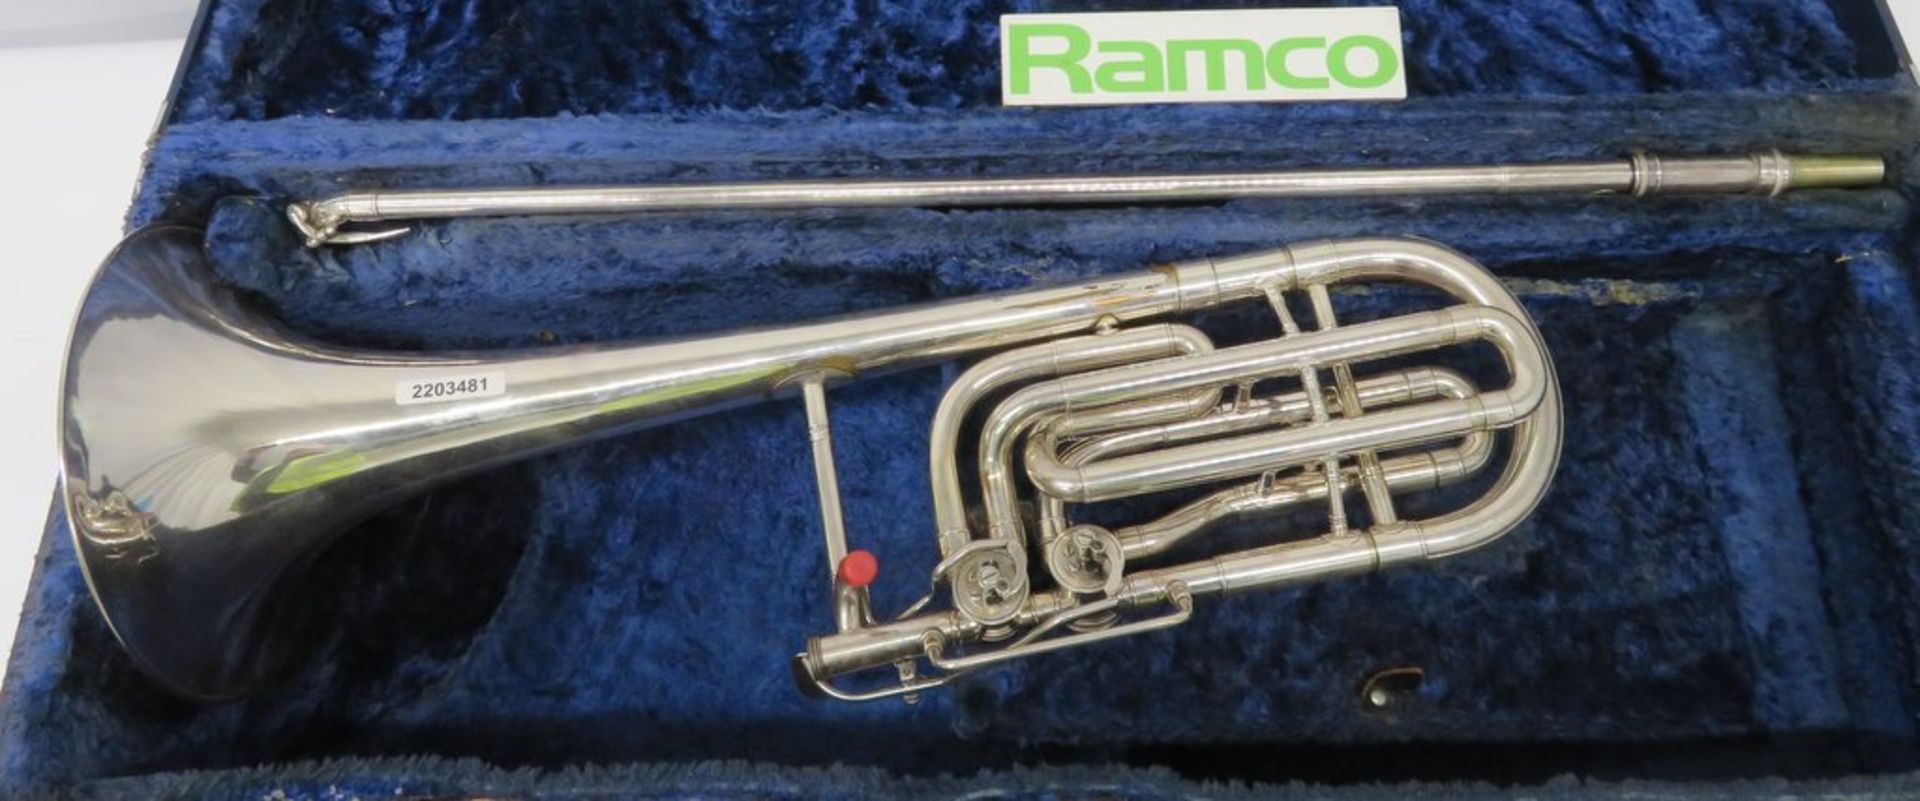 Boosey & Hawkes Sovereign 562 Bass Trombone Complete With Case. - Image 2 of 16